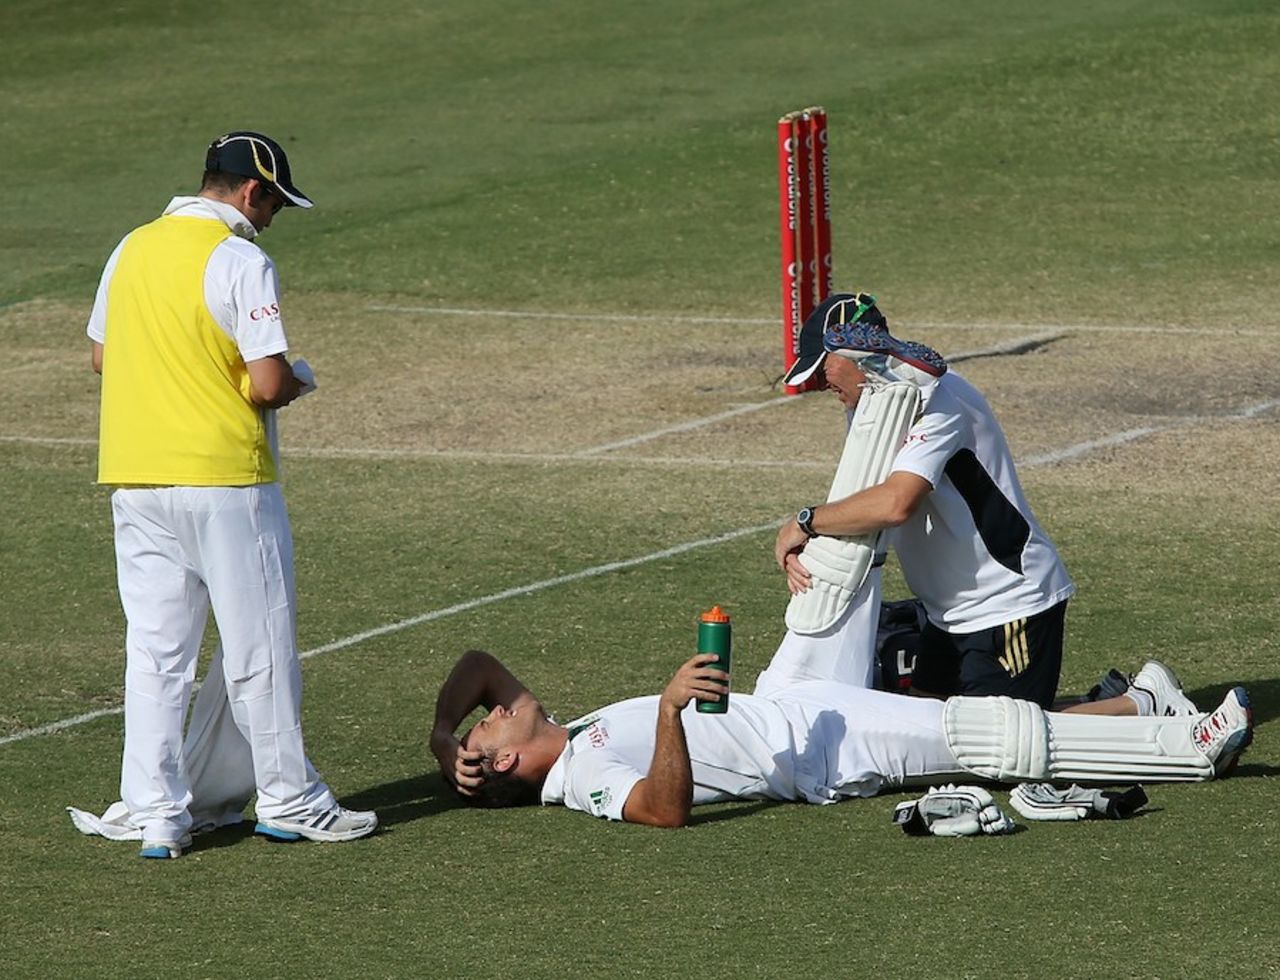 Faf du Plessis is treated for cramps, Australia v South Africa, 2nd Test, Adelaide, 5th day, November 26, 2012